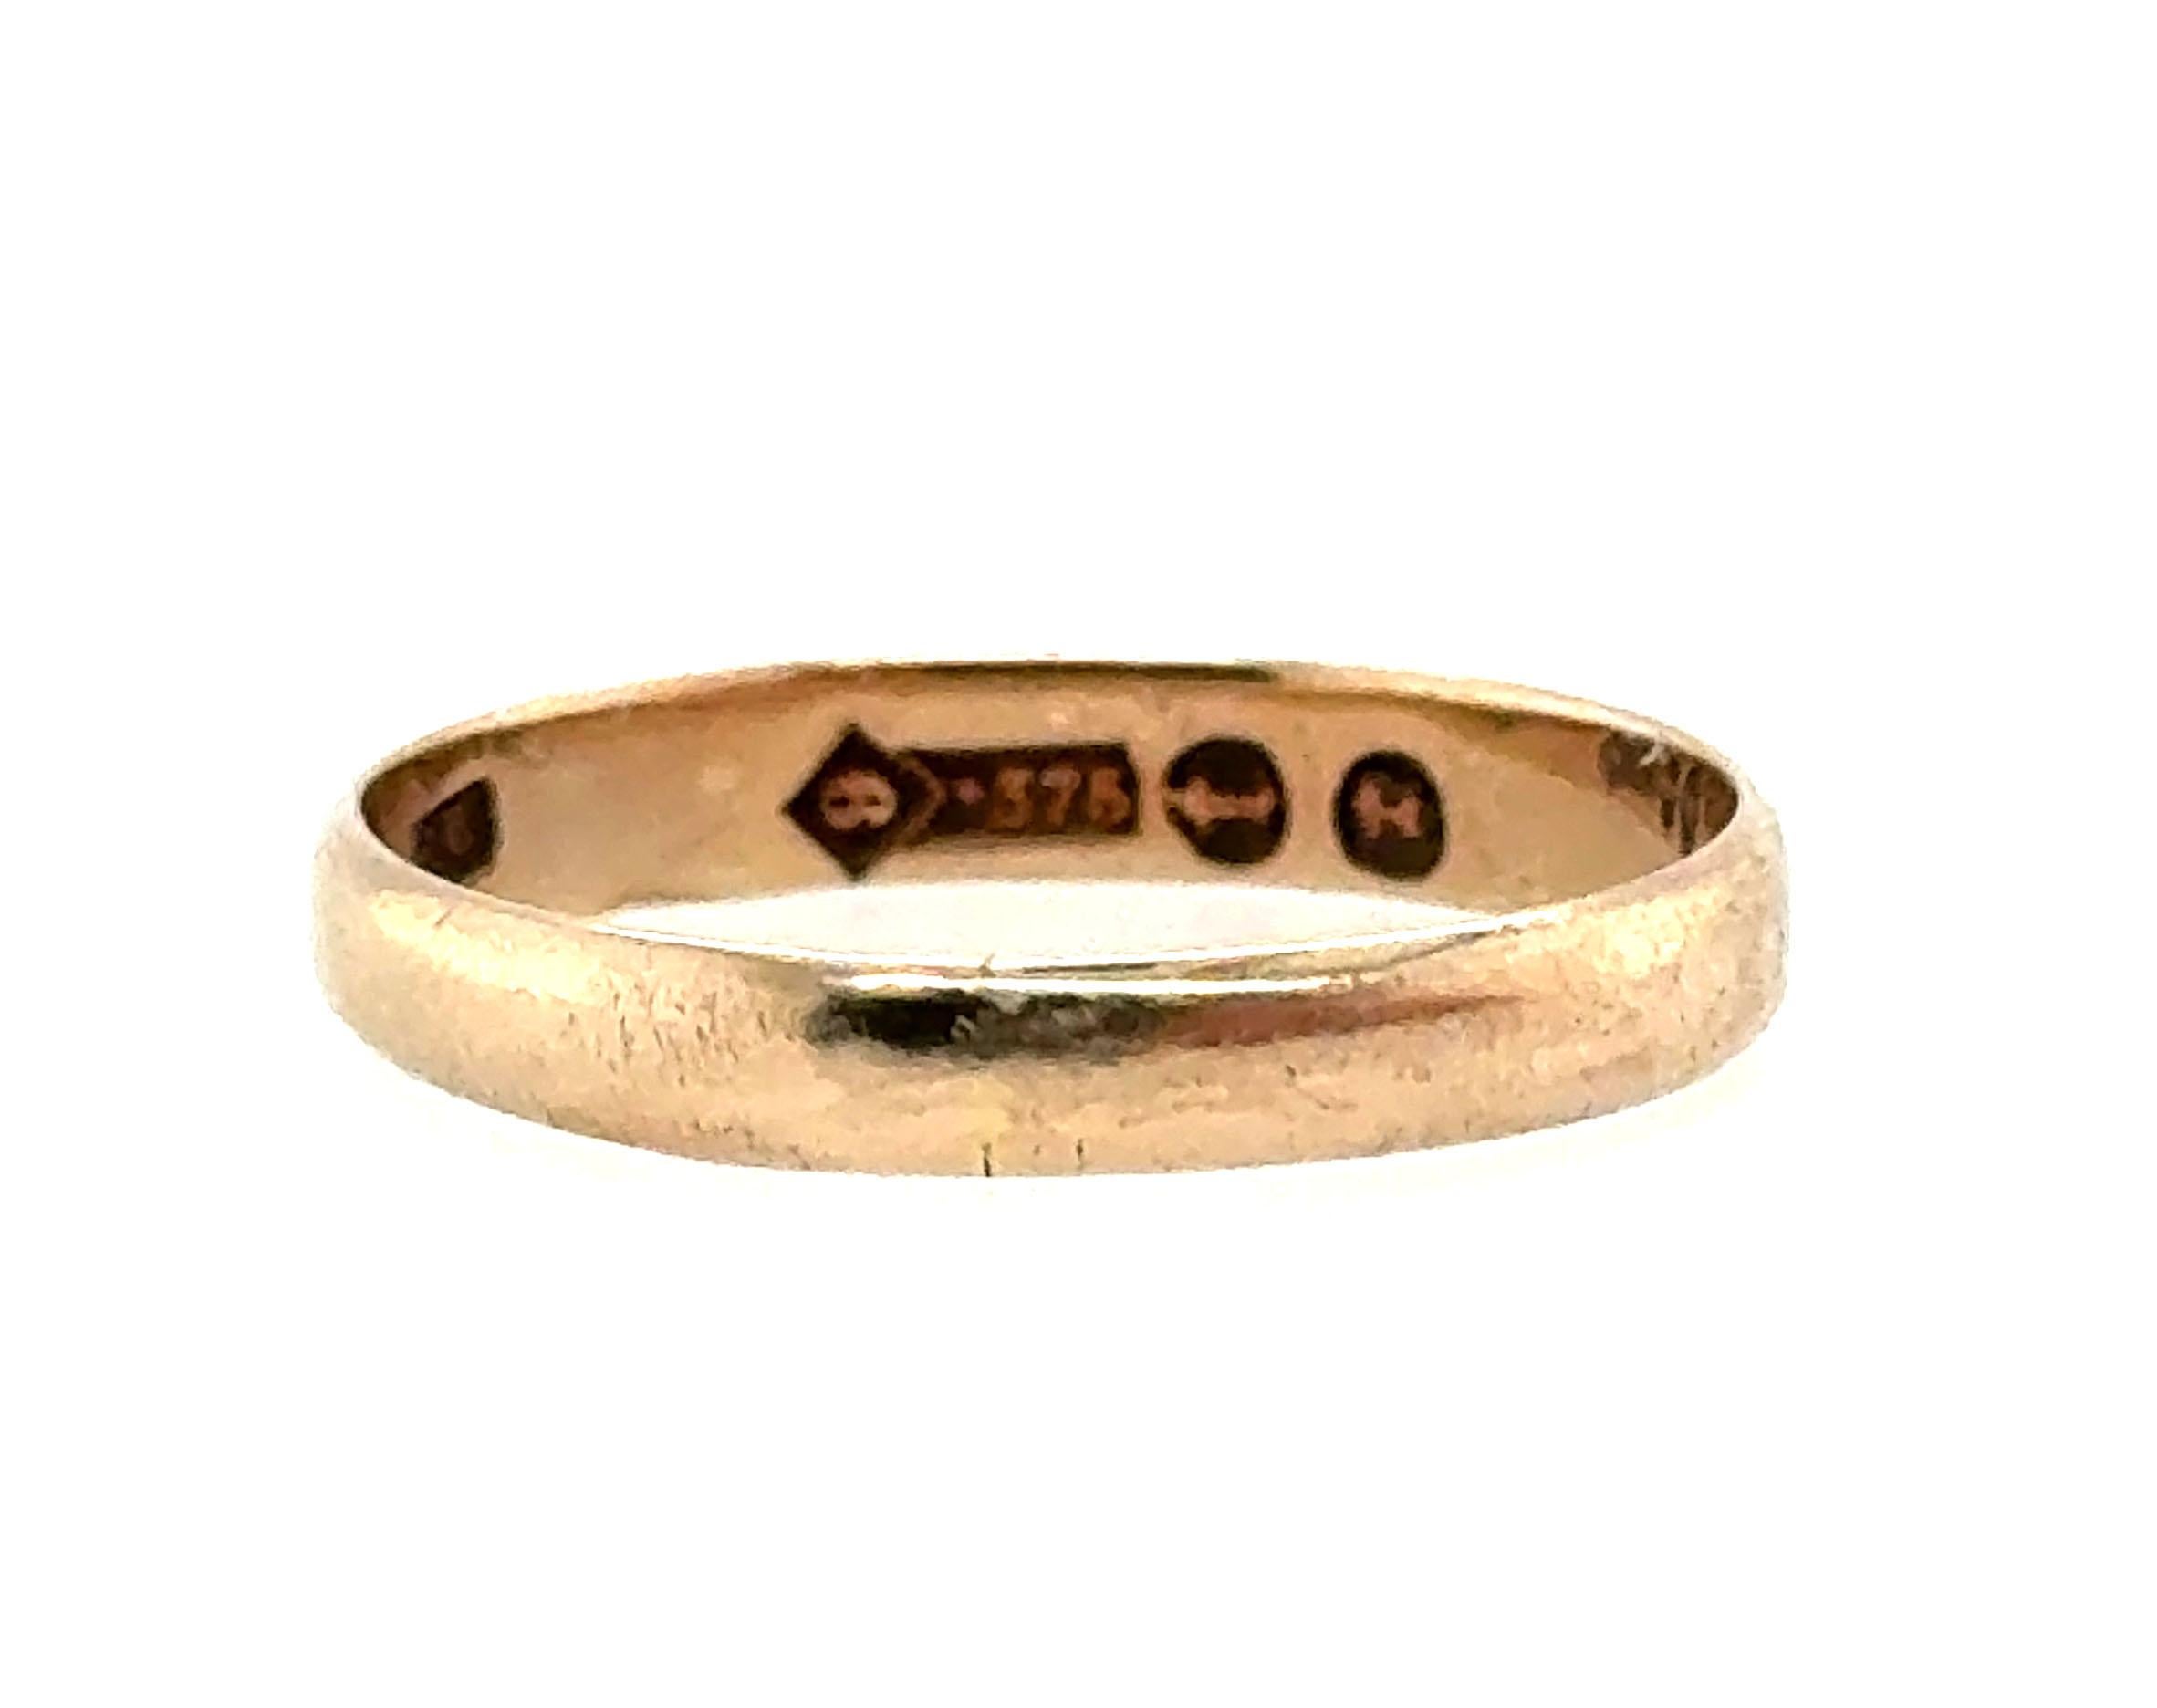 Victorian Wedding Ring Band Ladies Antique Yellow Gold Original 1874 London In Excellent Condition For Sale In Dearborn, MI